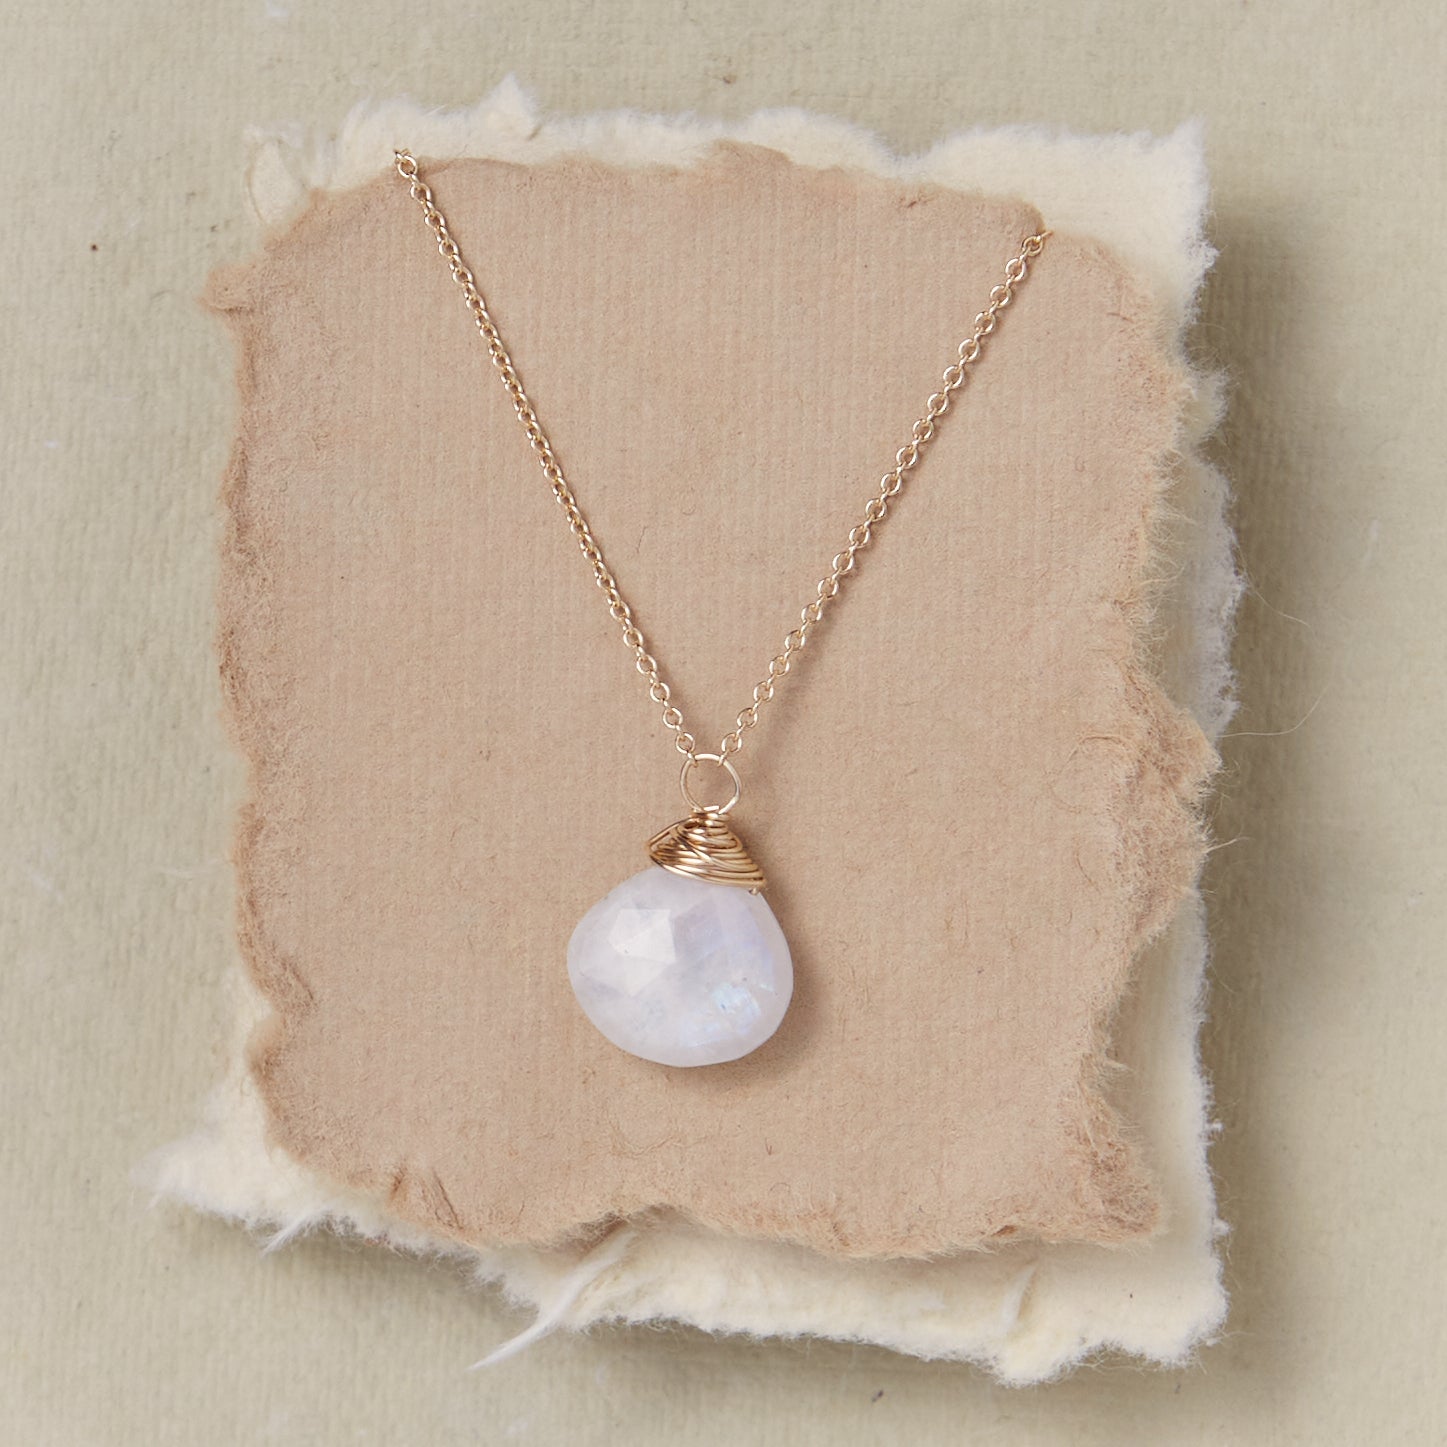 Adornment Necklace by the Israel Museum: Moonstone Pendant